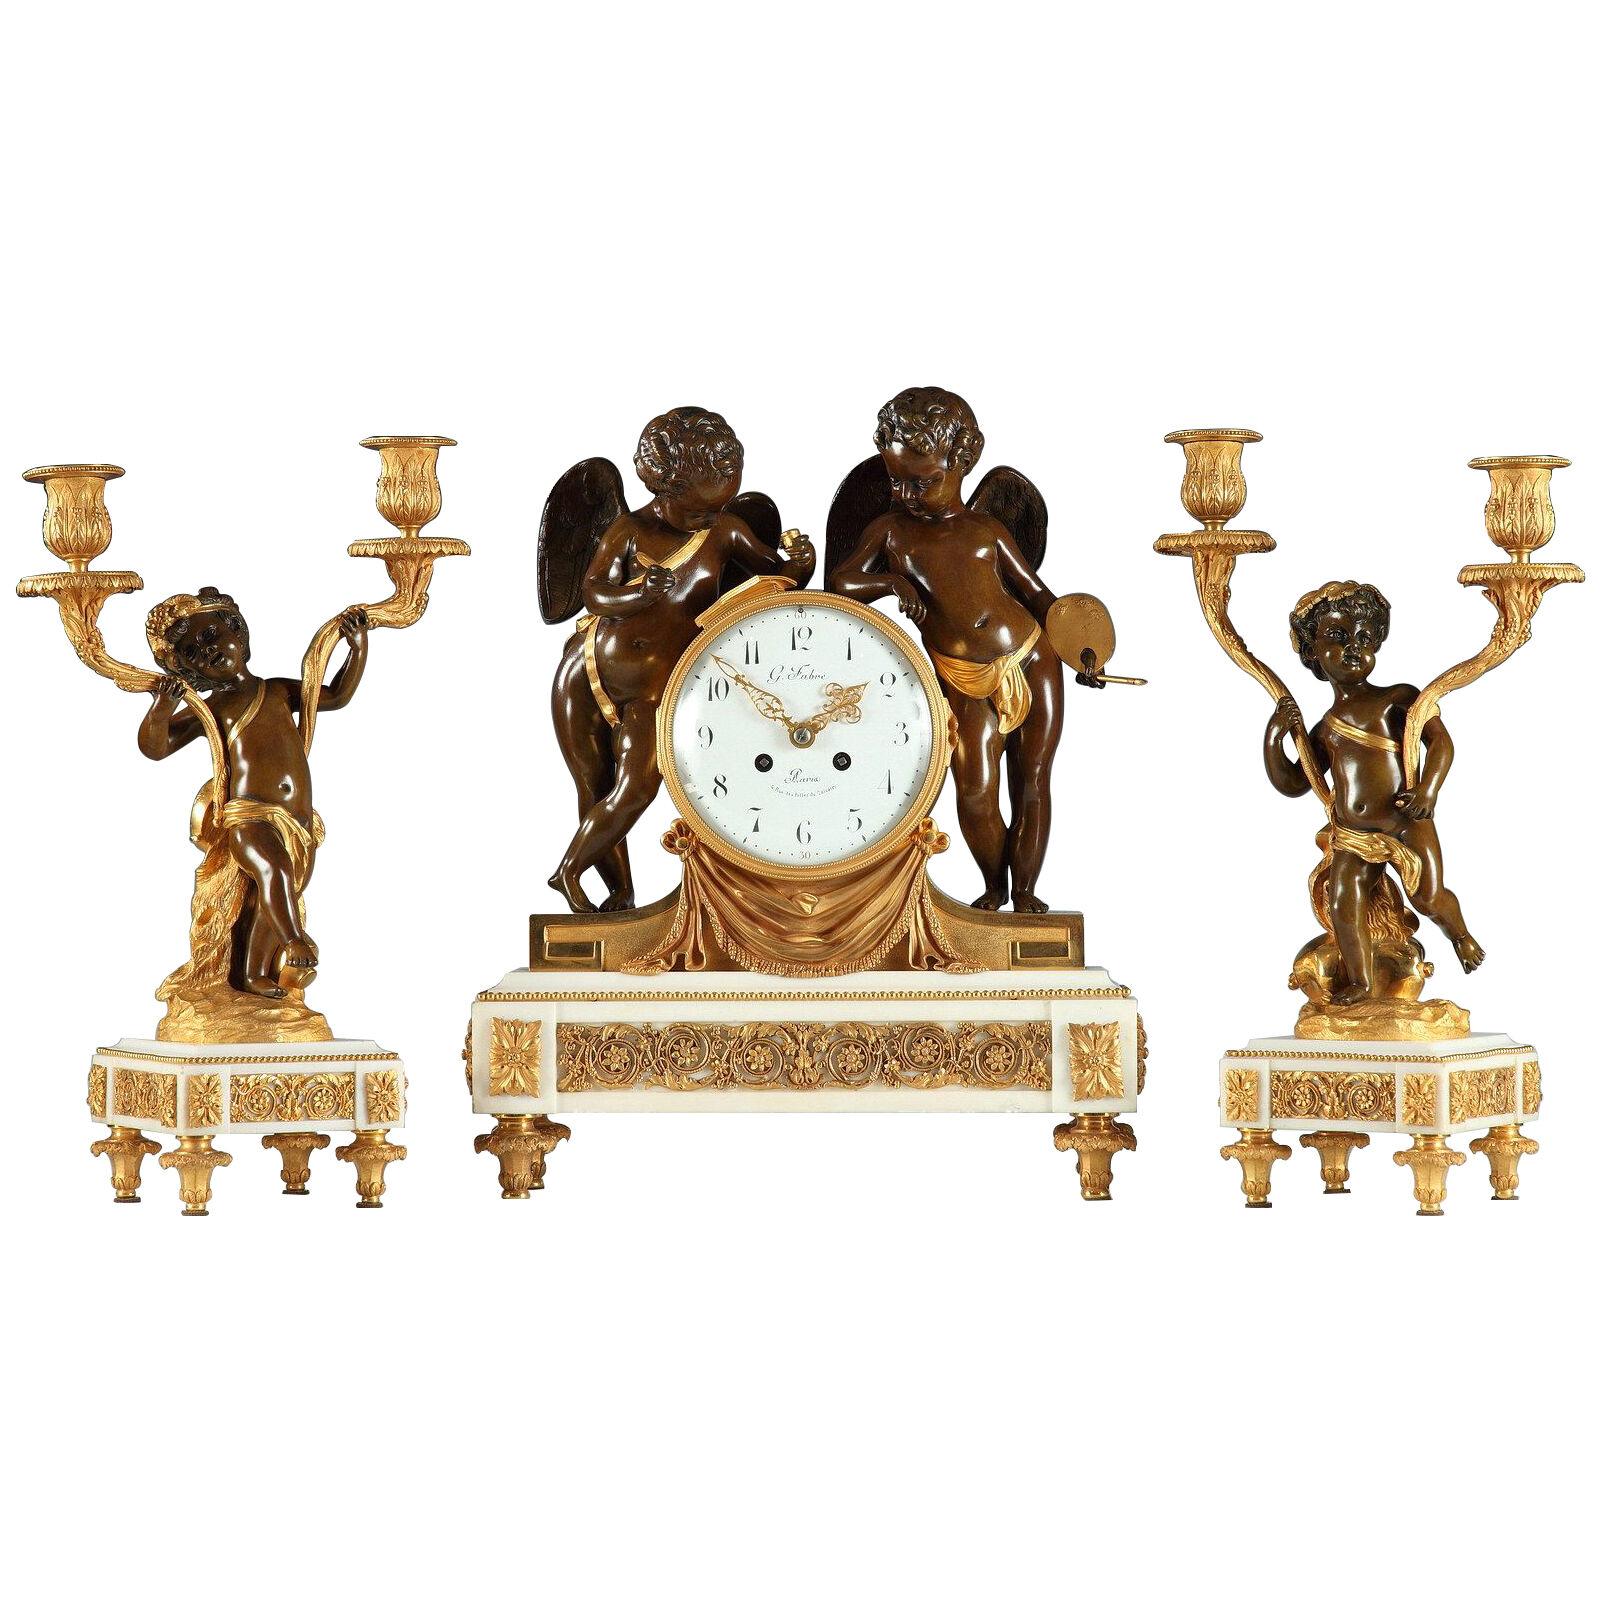 "Geniuses of the Arts" Gilded Bronze and Marble Clock Set by G. Fabre, c. 1880